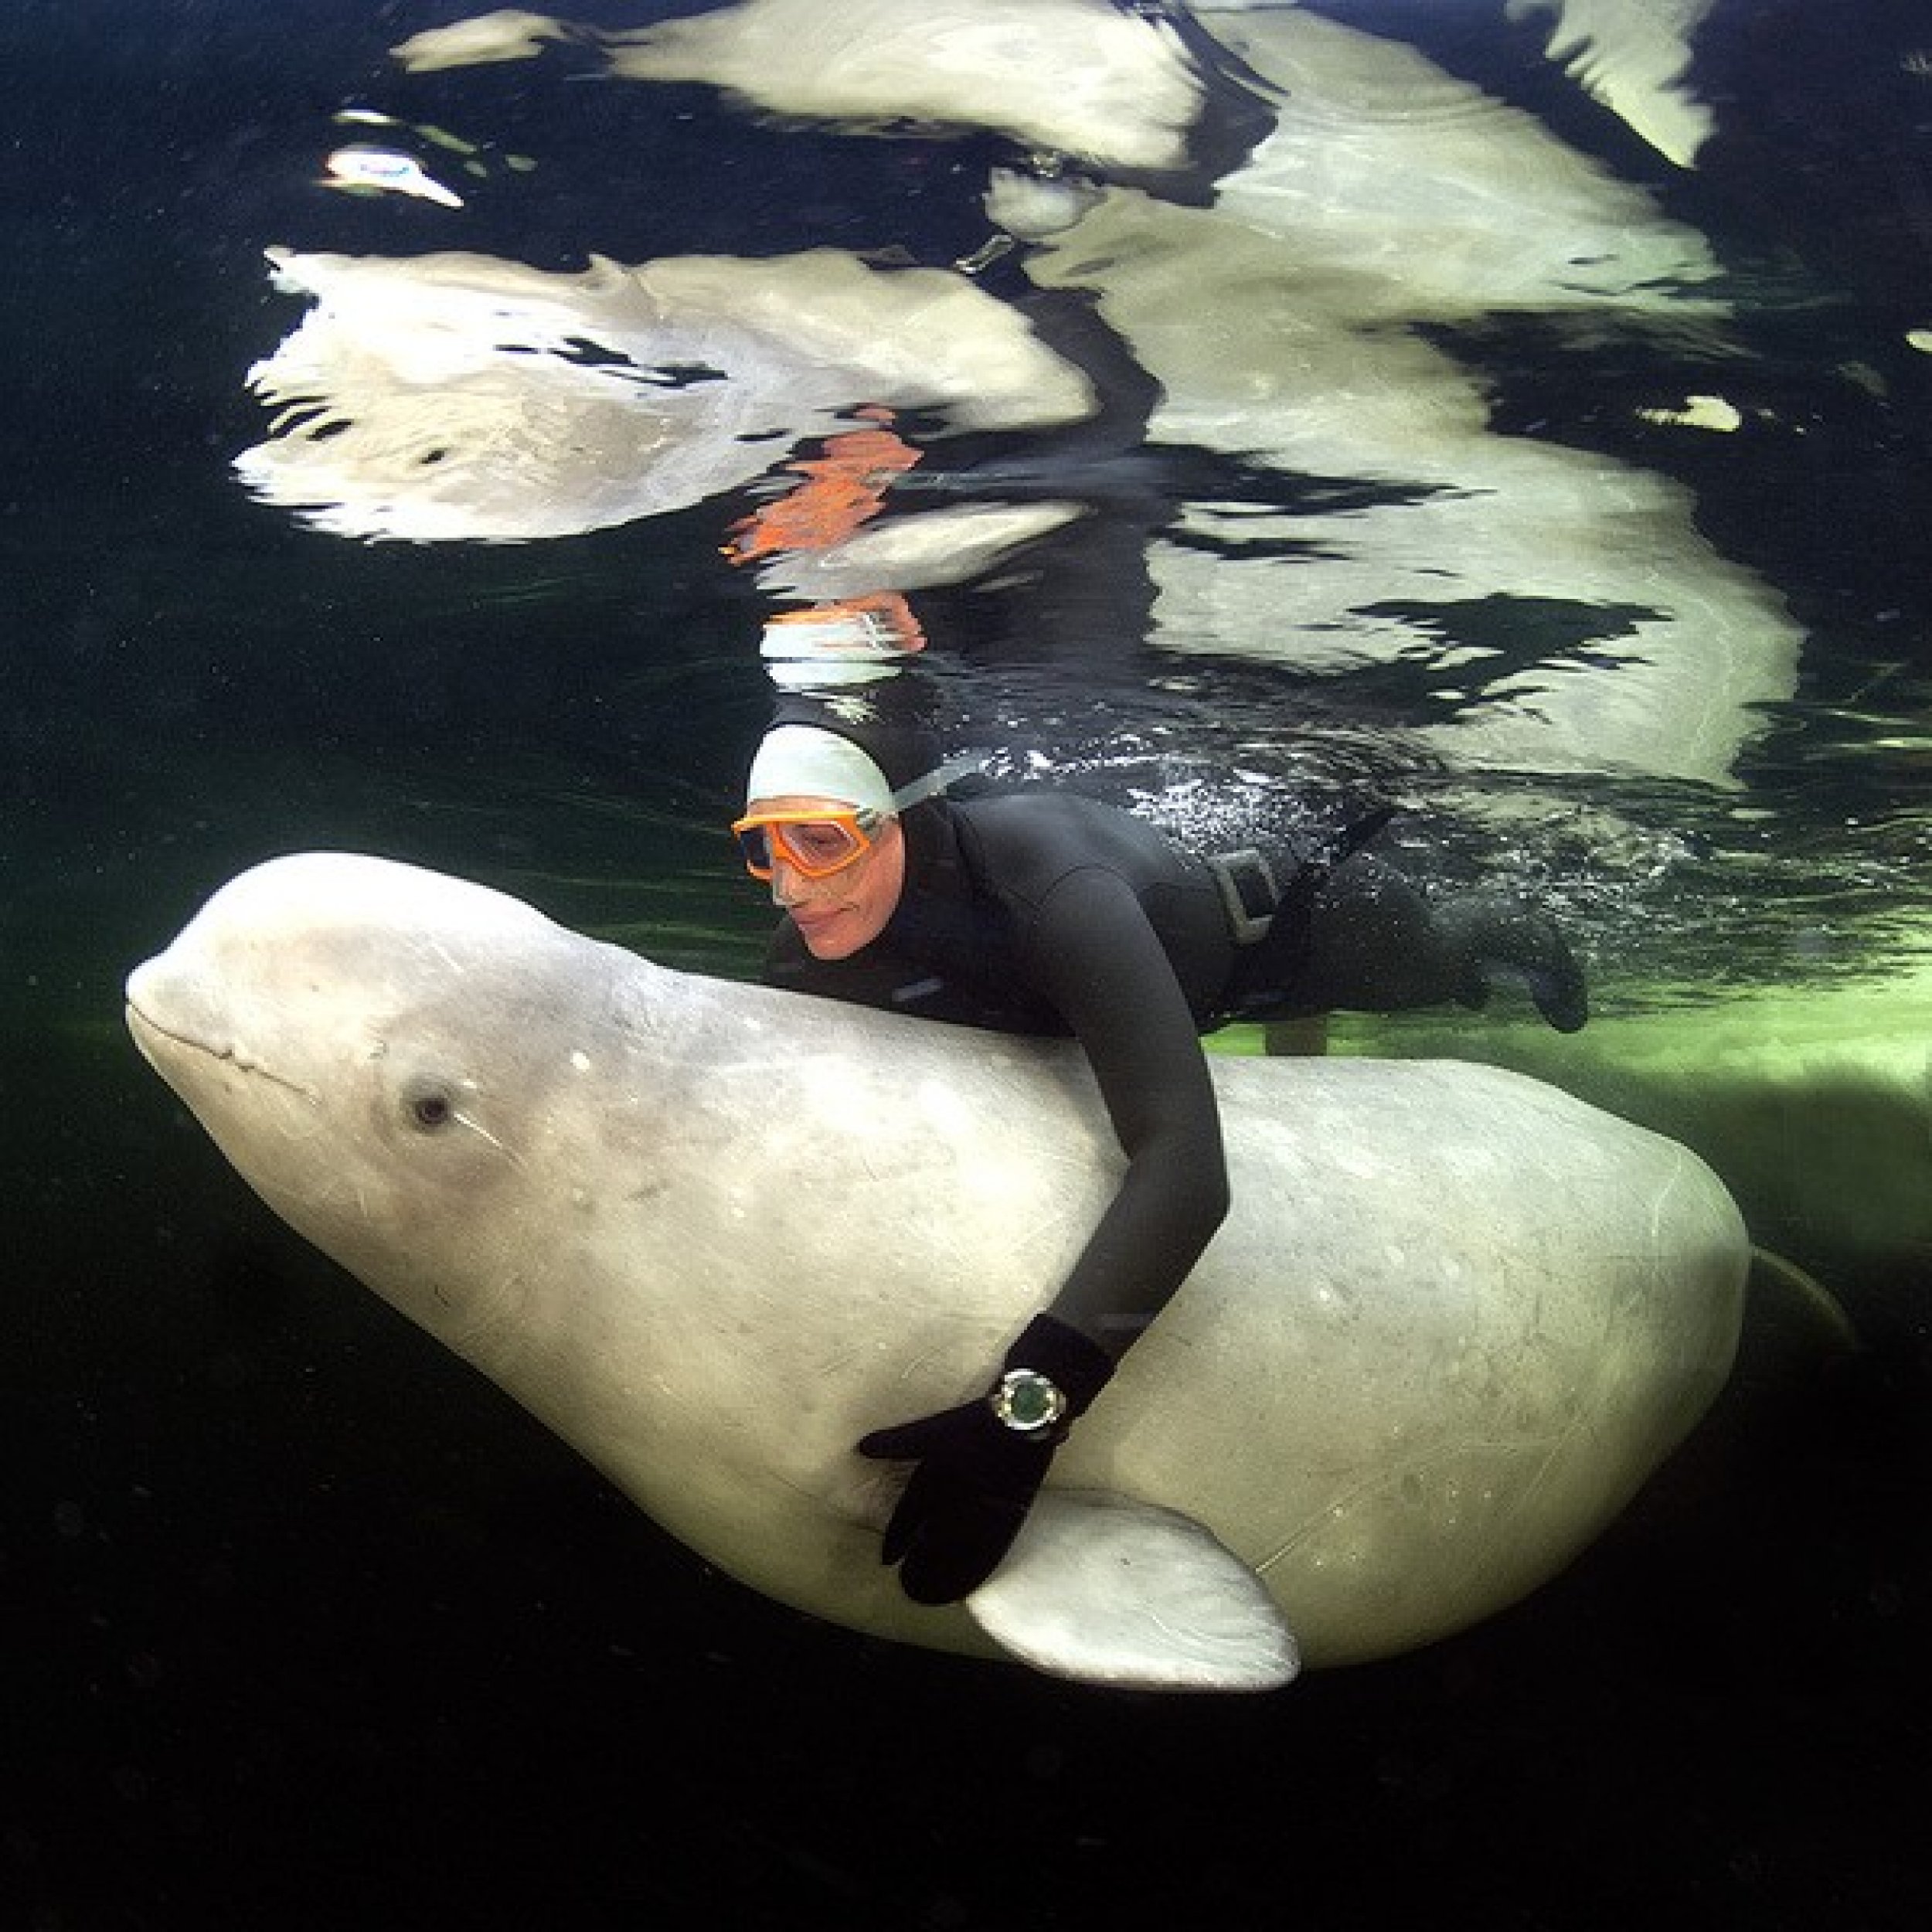 Breathtaking photos of womans nude swim with Beluga whales Warning Graphic images